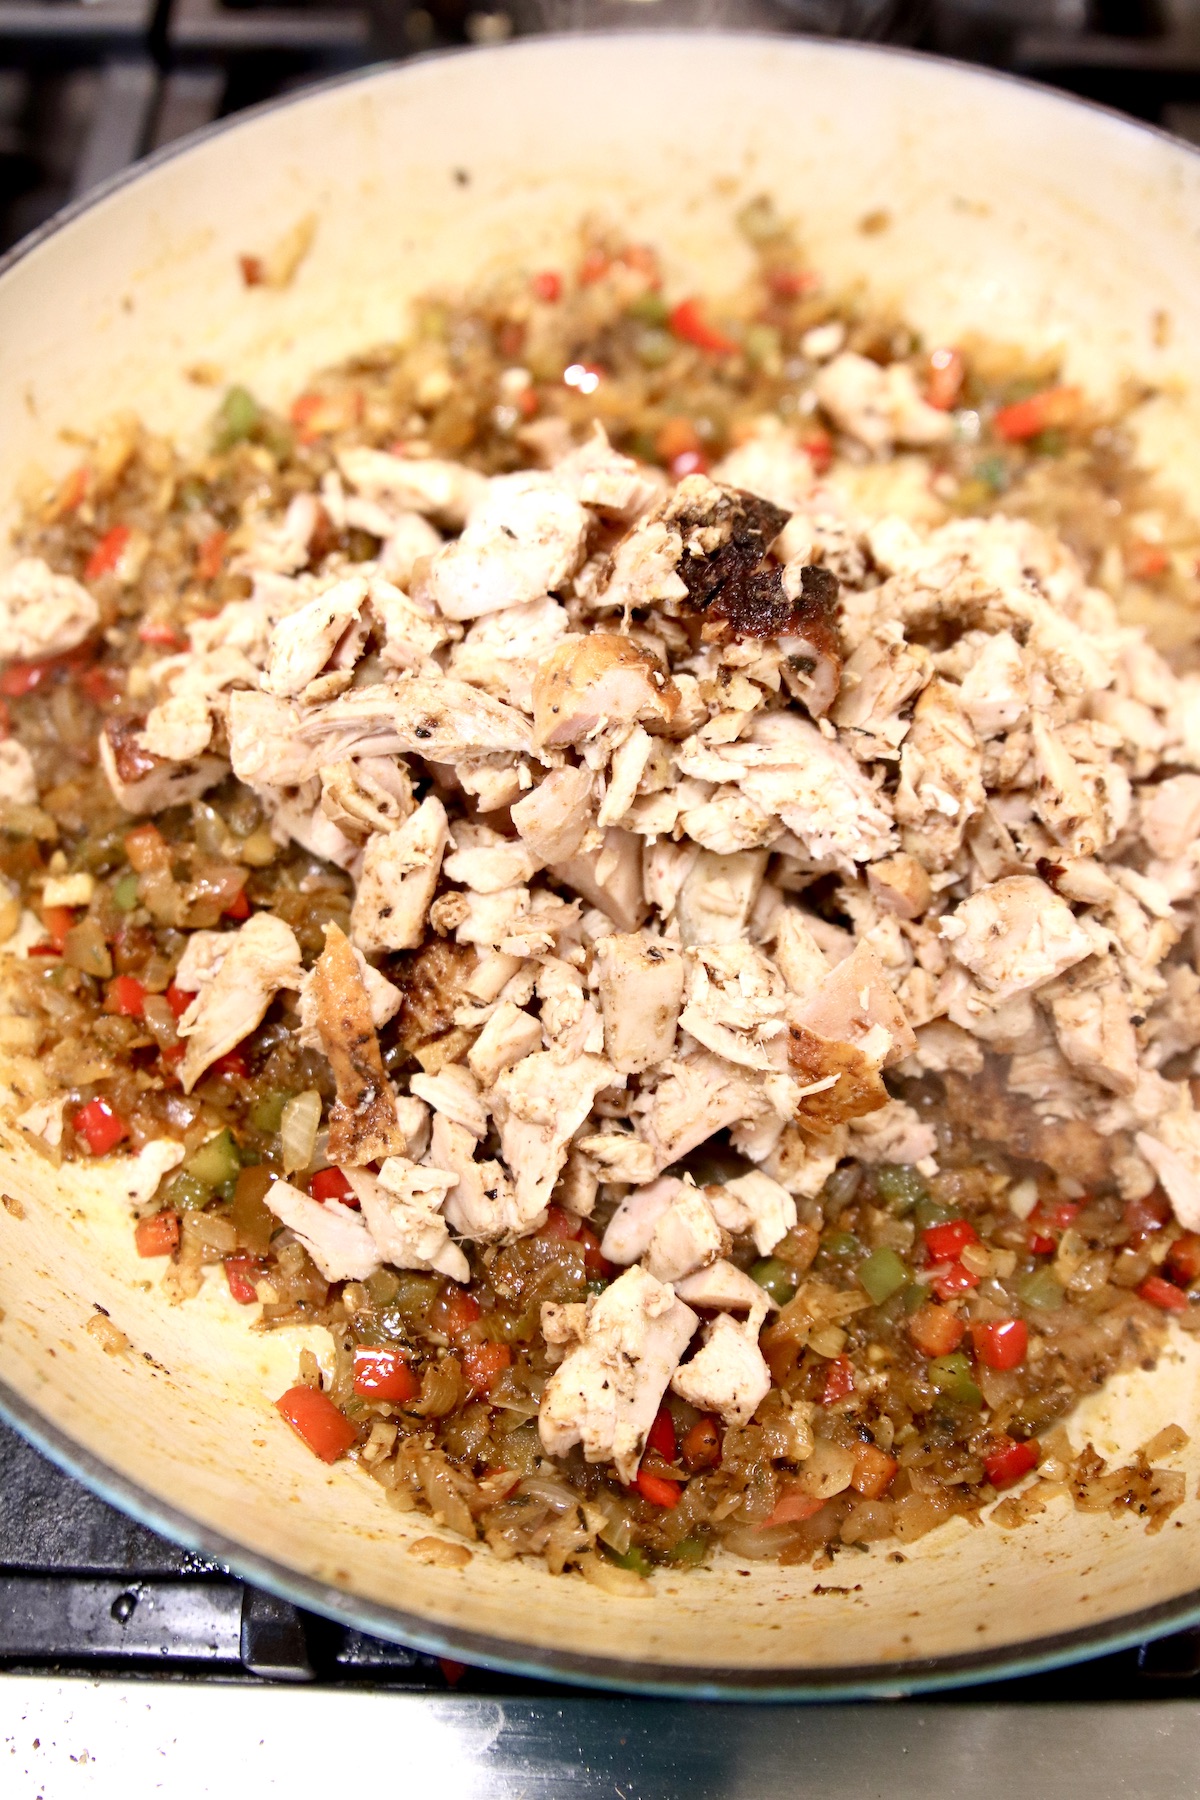 diced chicken added to skillet with peppers and onions